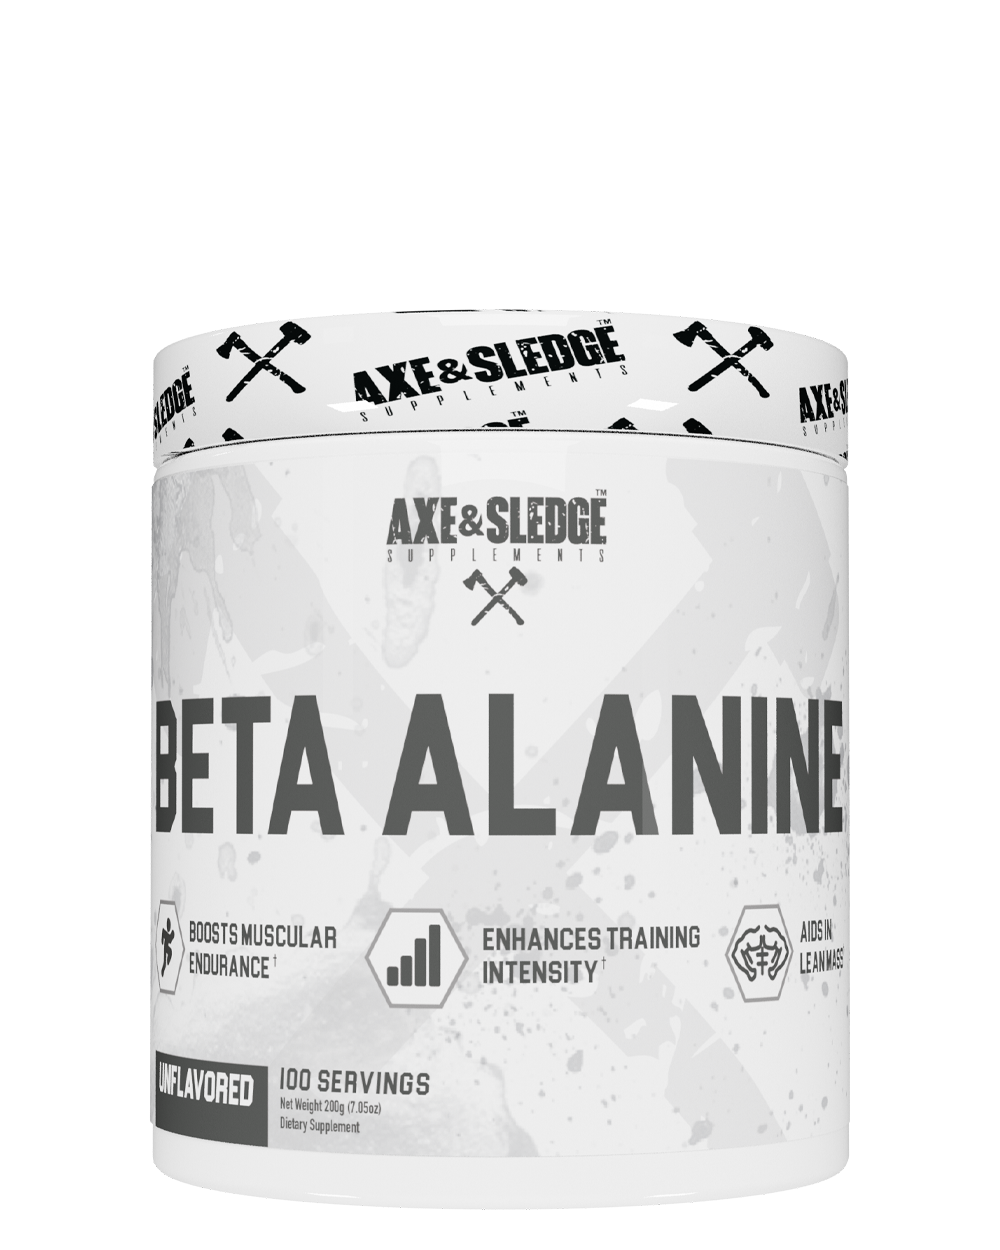 What is Beta Alanine? Benefits, Dosage & Side-Effects of Beta Alanine